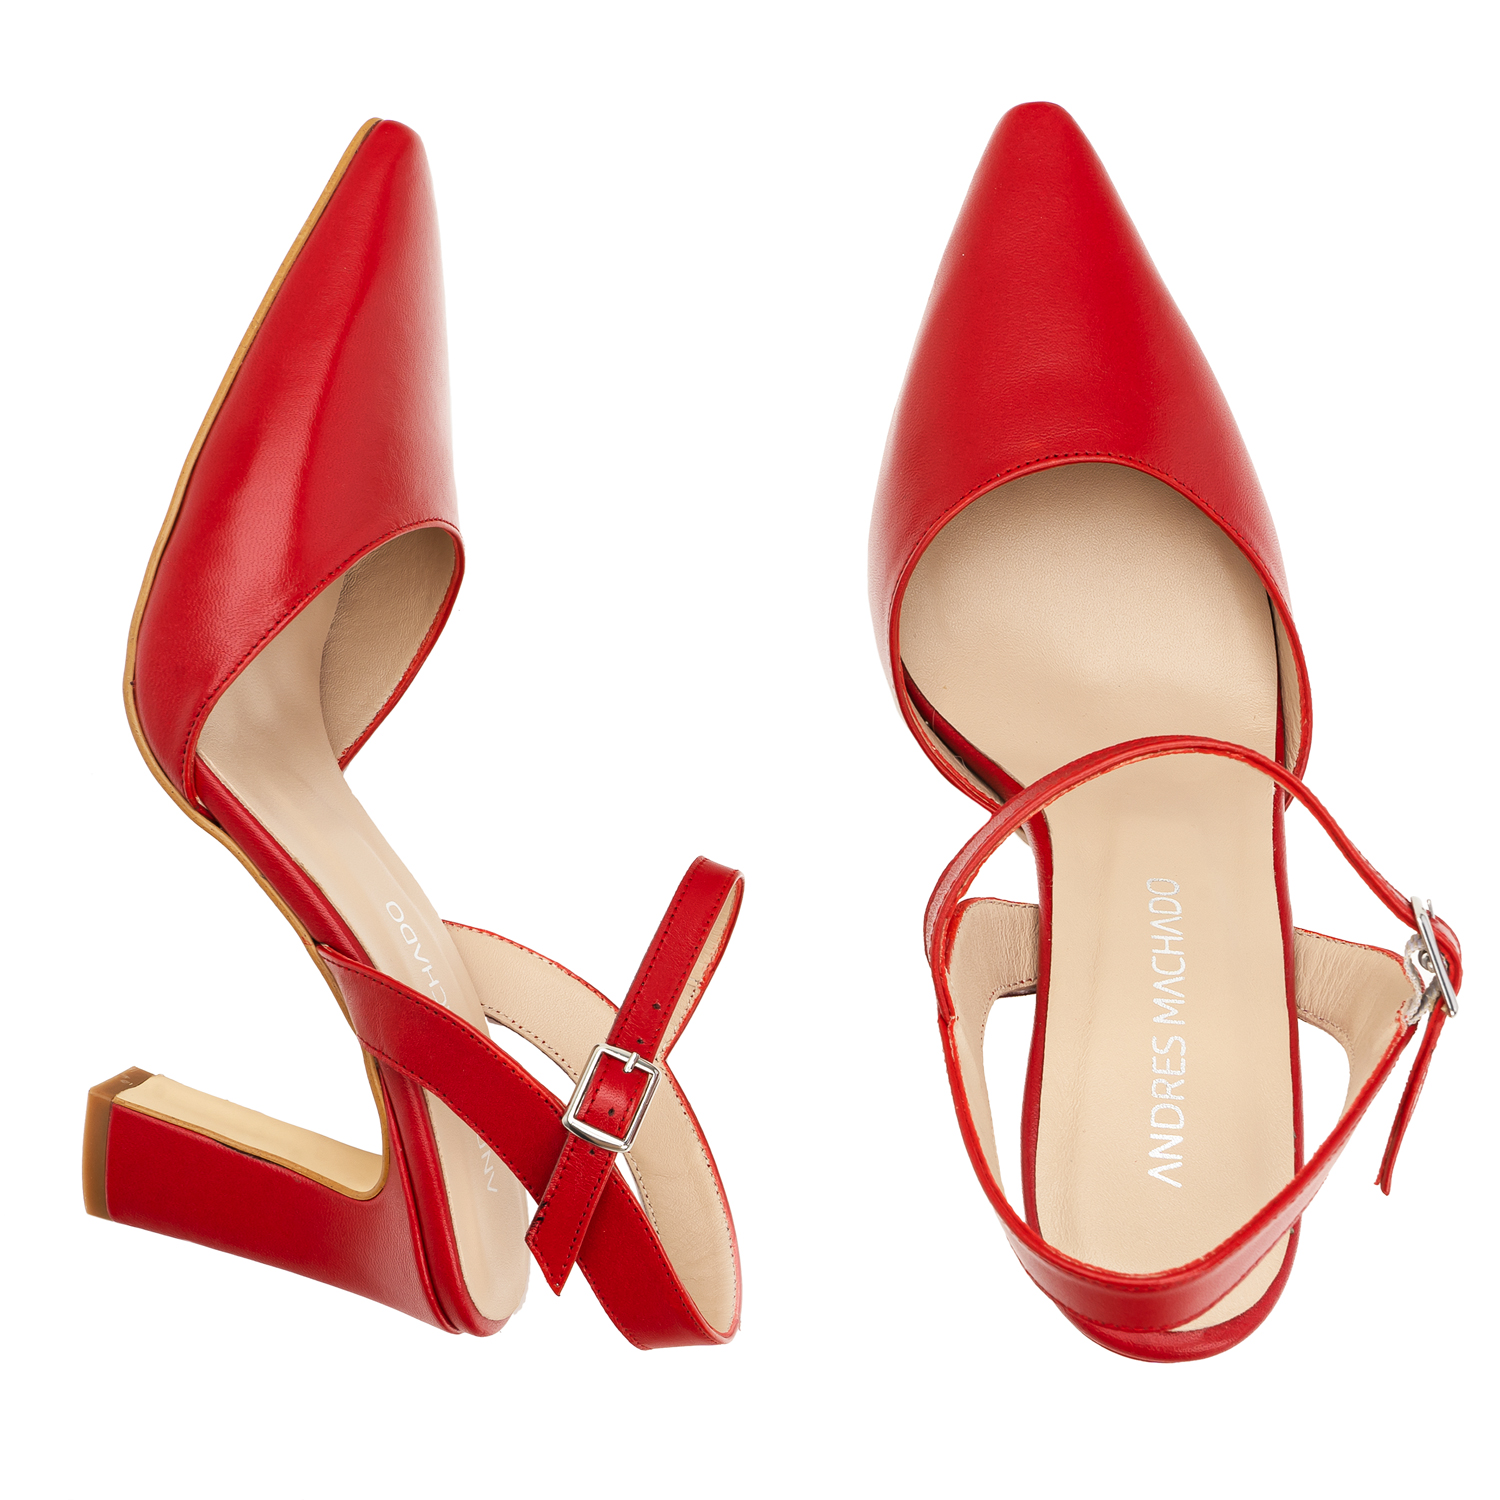 Slingback Heels in Red Leather 